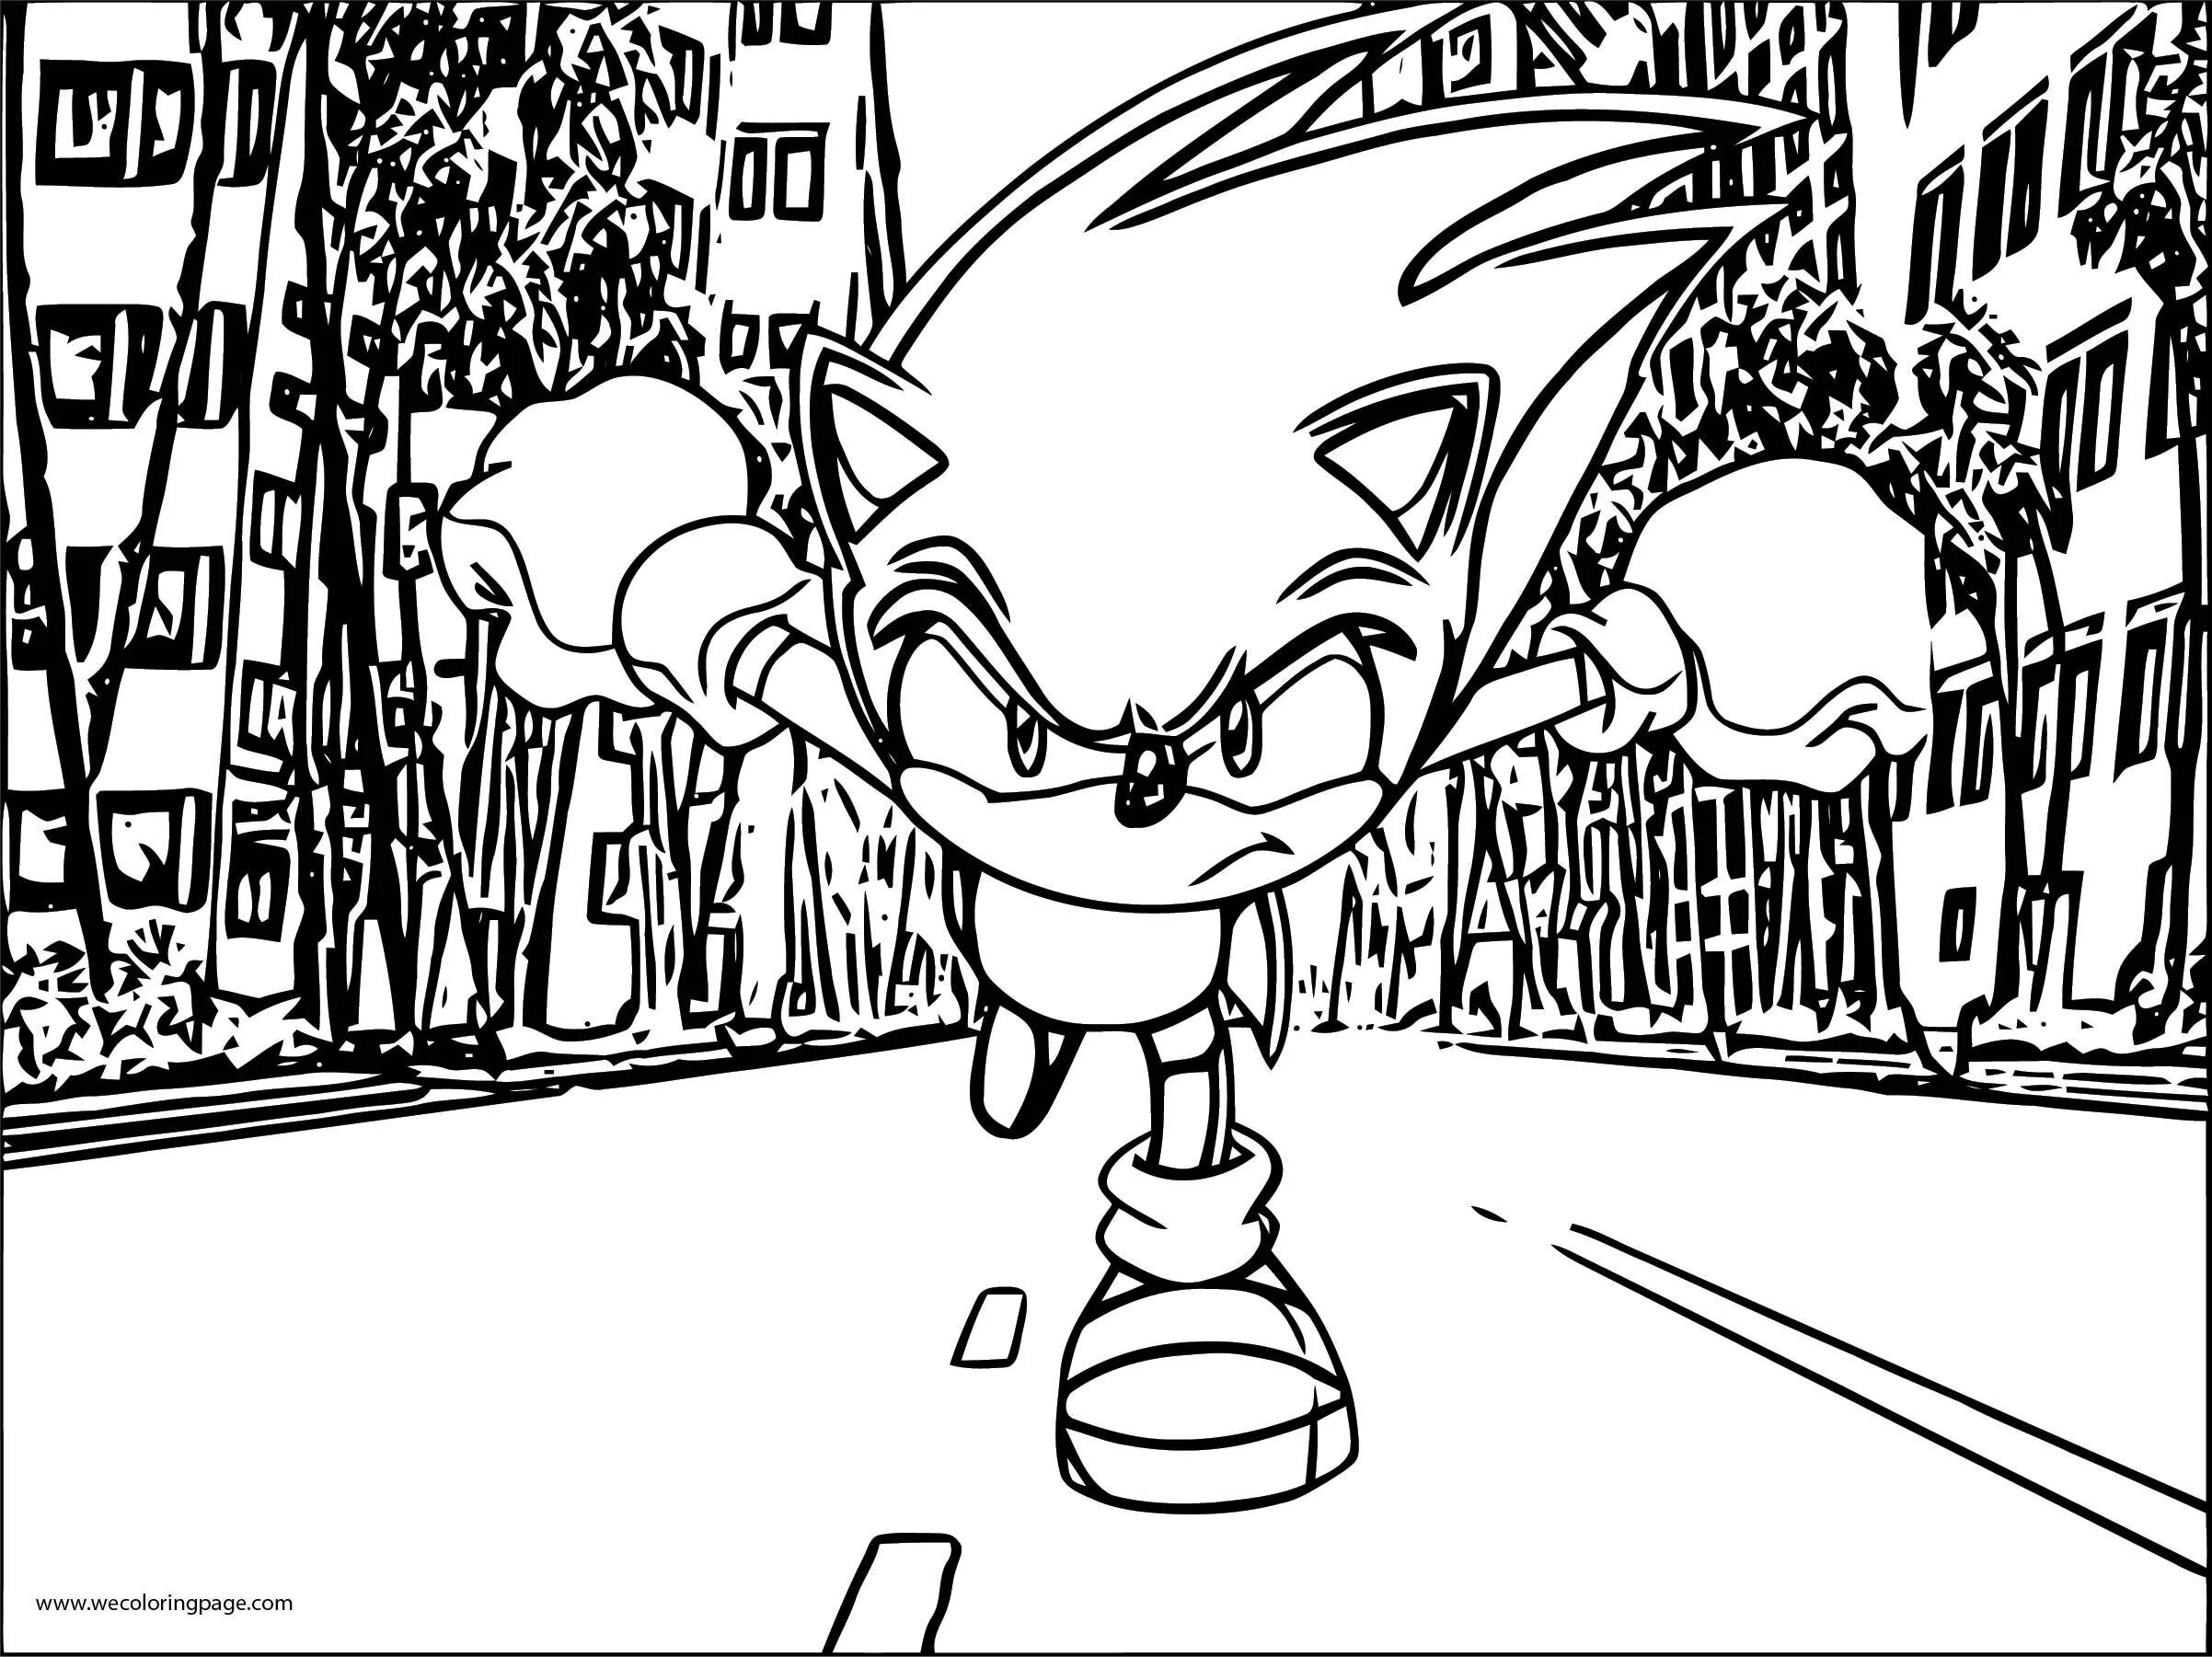 Violent sonic monster coloring book